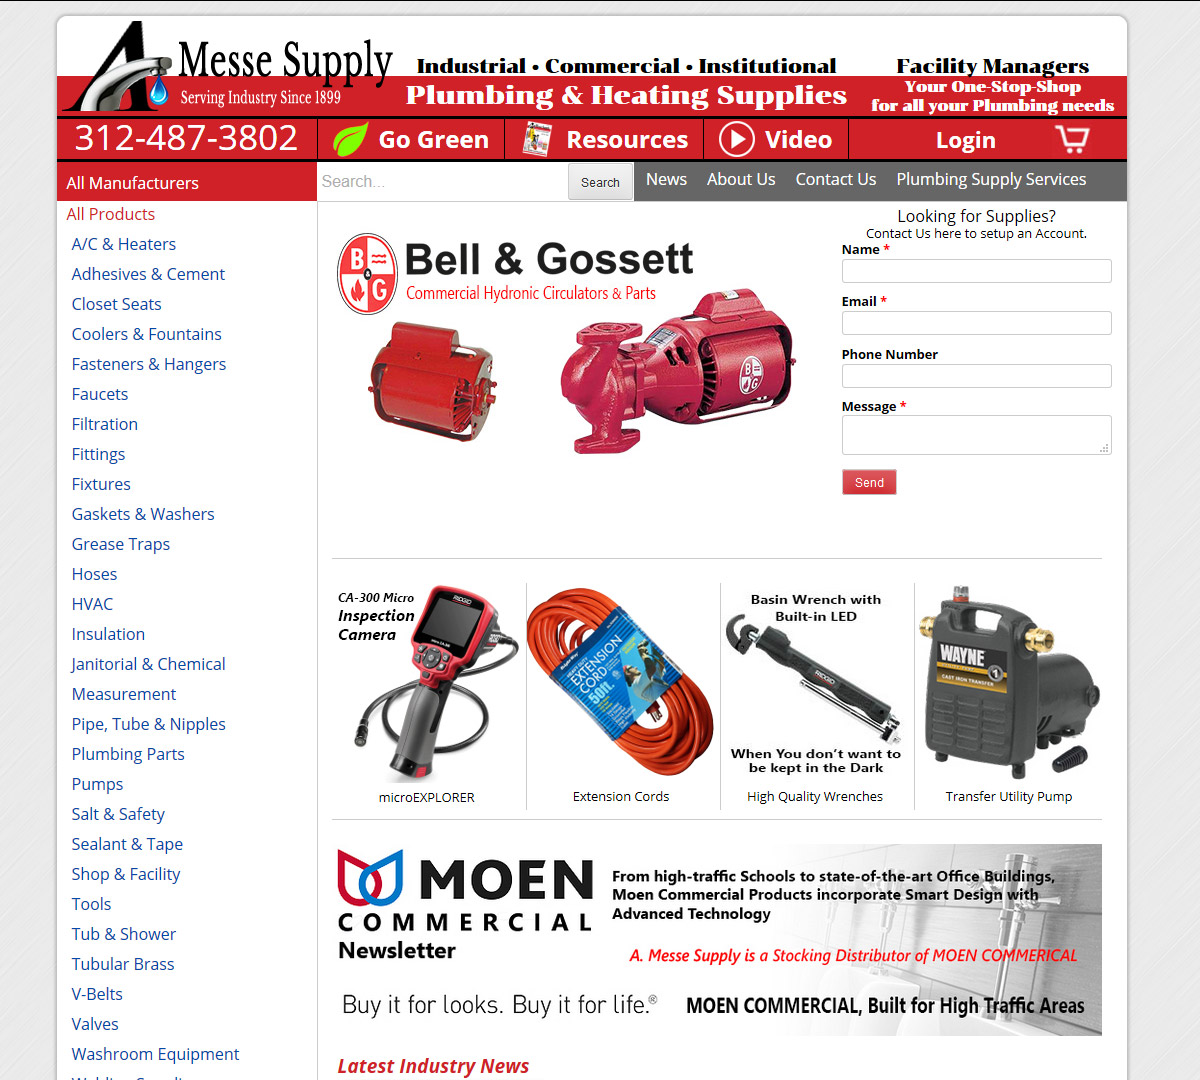 A Messe Supply – Website